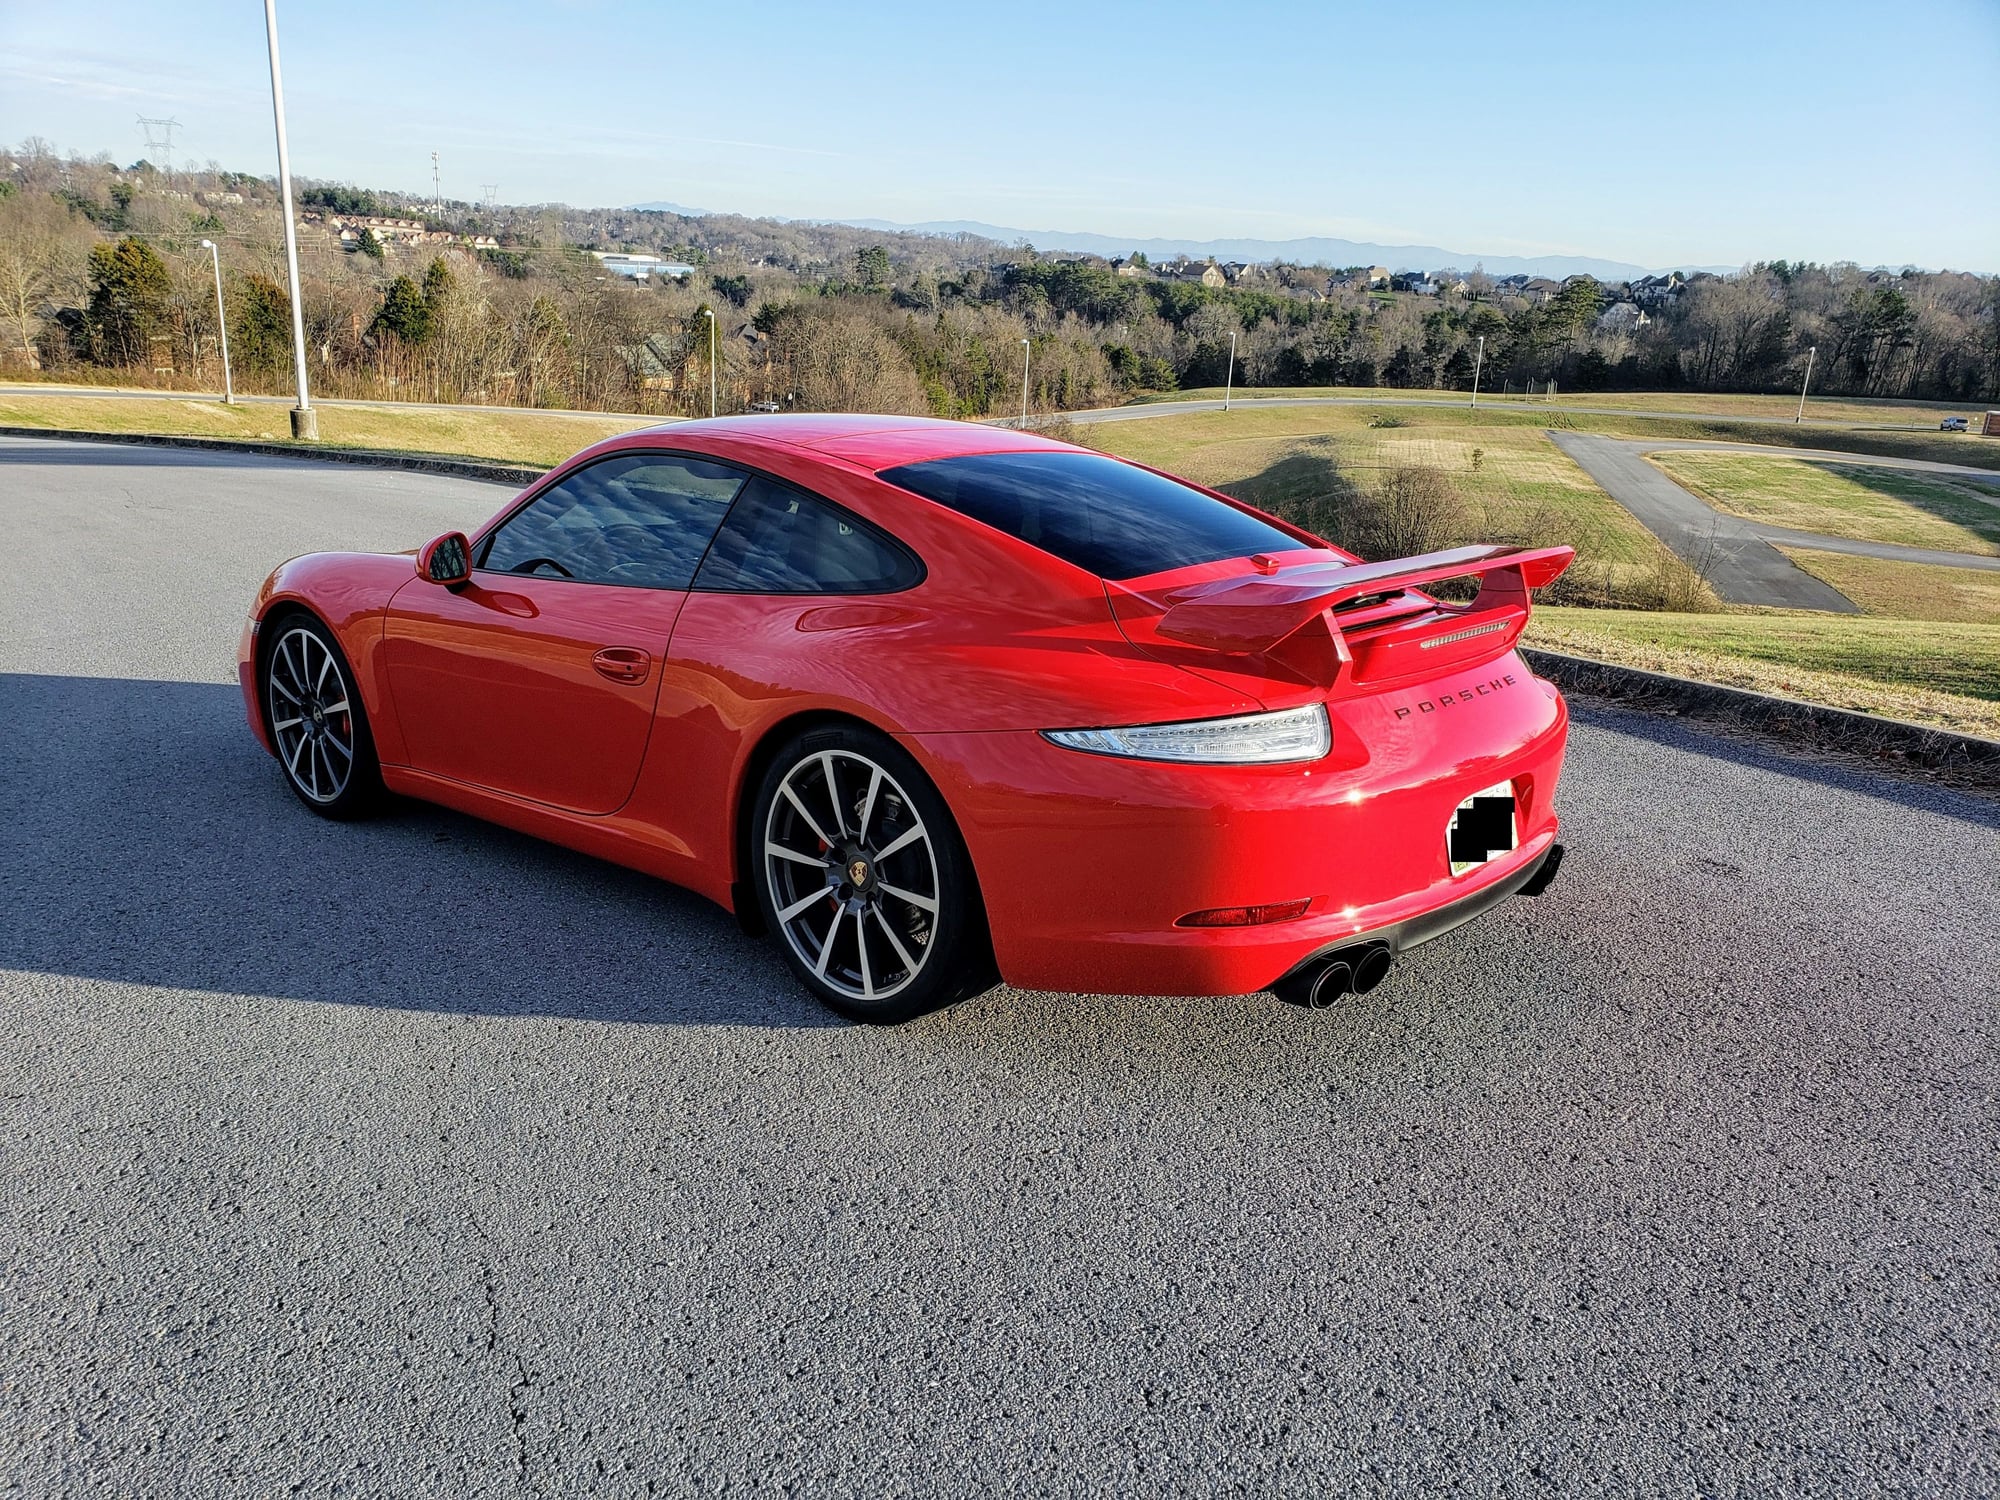 2012 Porsche 911 - 2012 Porsche 991/911 Carrera S Guards Red - Soul Performance Exhaust - Used - VIN WP0AB2A90CS121336 - 30,500 Miles - 6 cyl - 2WD - Automatic - Coupe - Red - Knoxville, TN 37922, United States